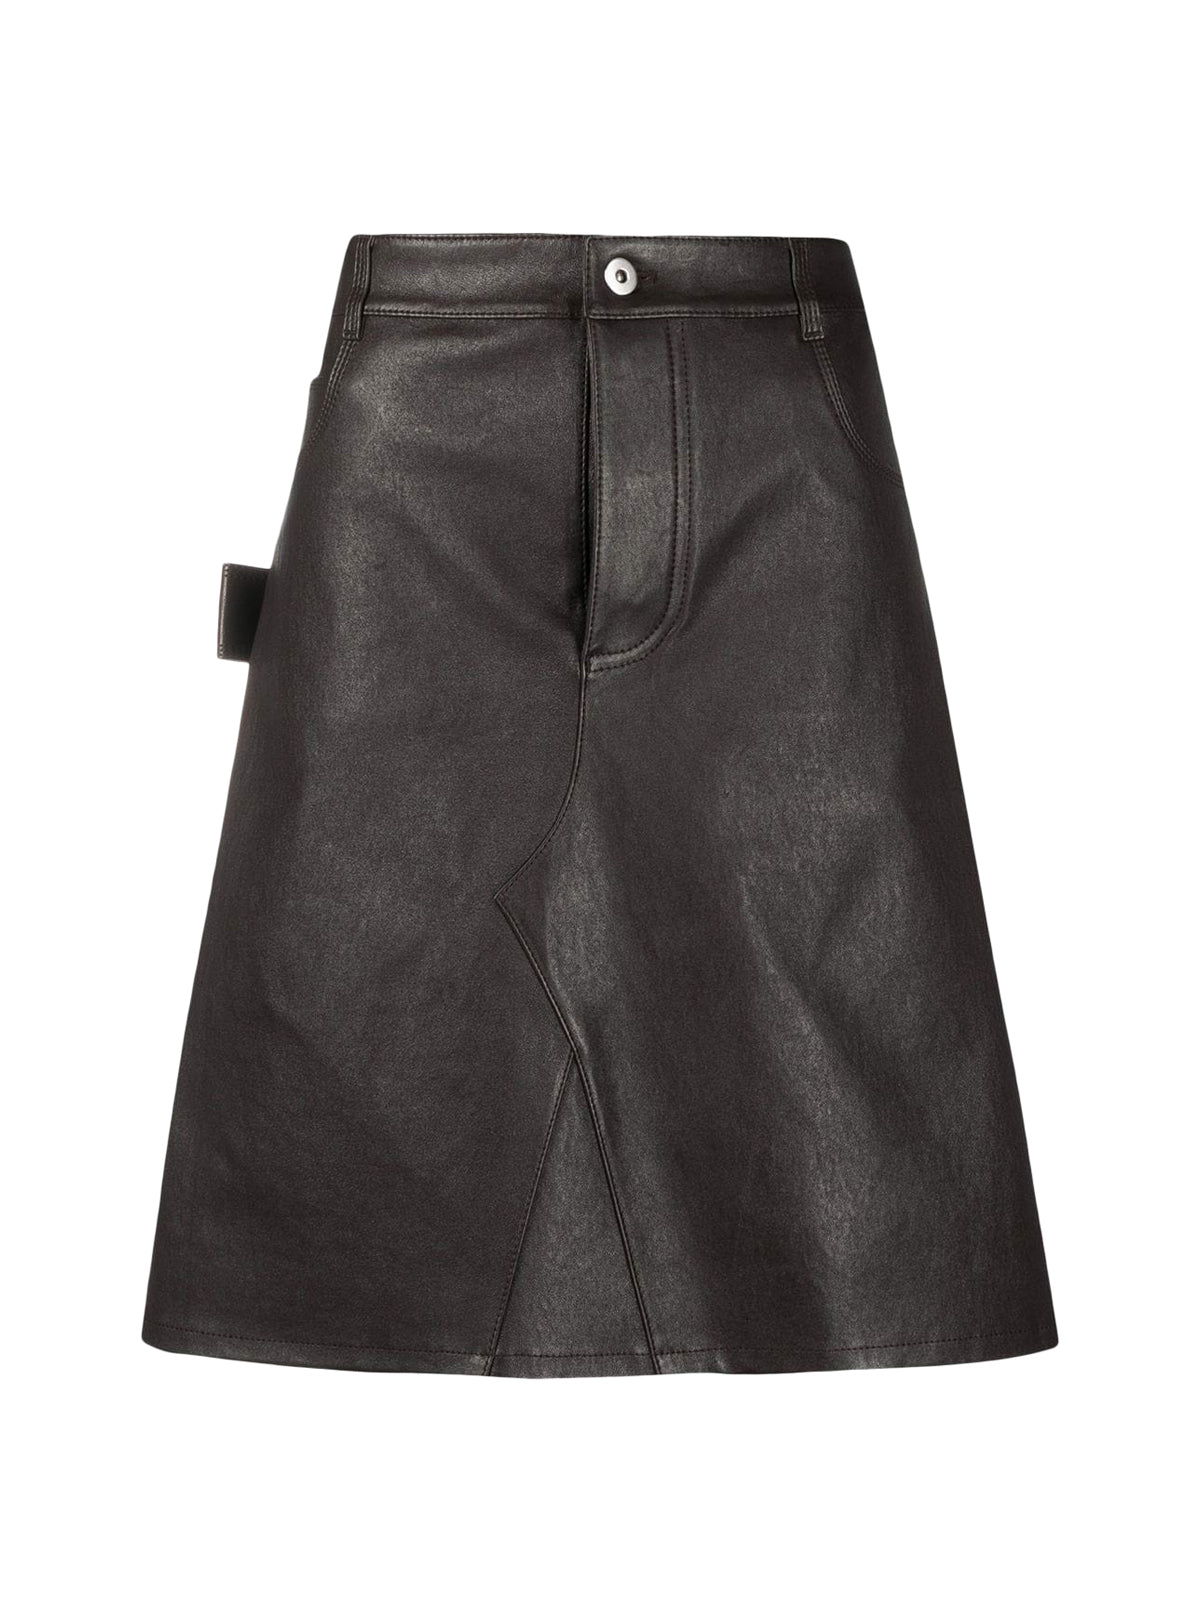 SKIRT IN LEATHER